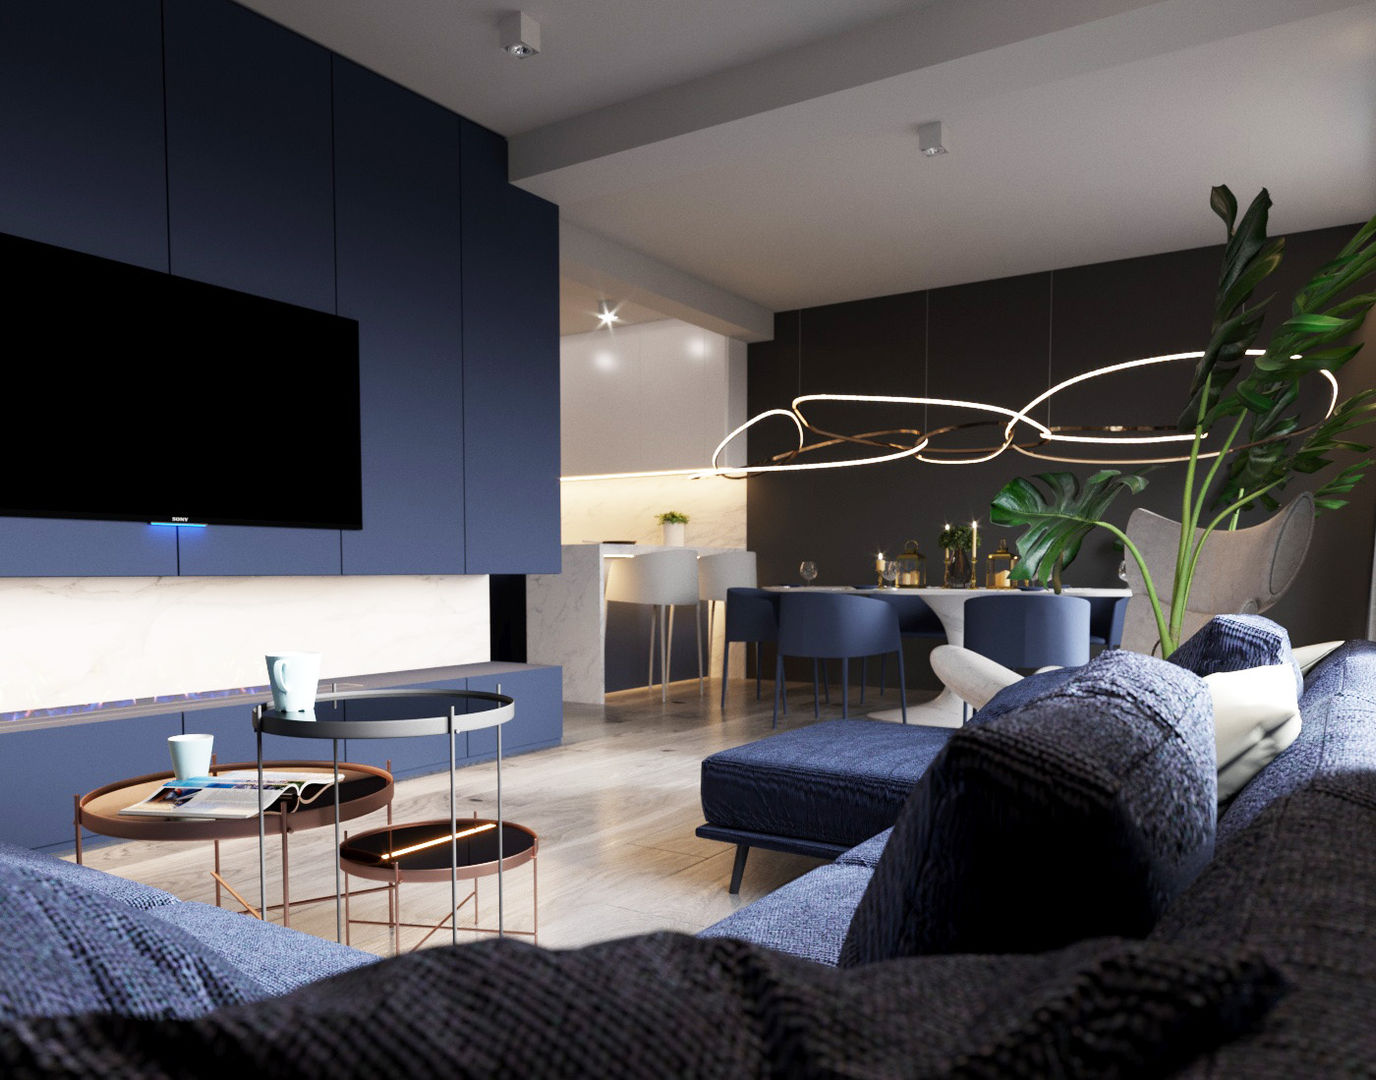 A Navy Situation homify Modern Living Room living room,Living room,open plan,lighting,sofa,coffee table,kitchen,Kitchen